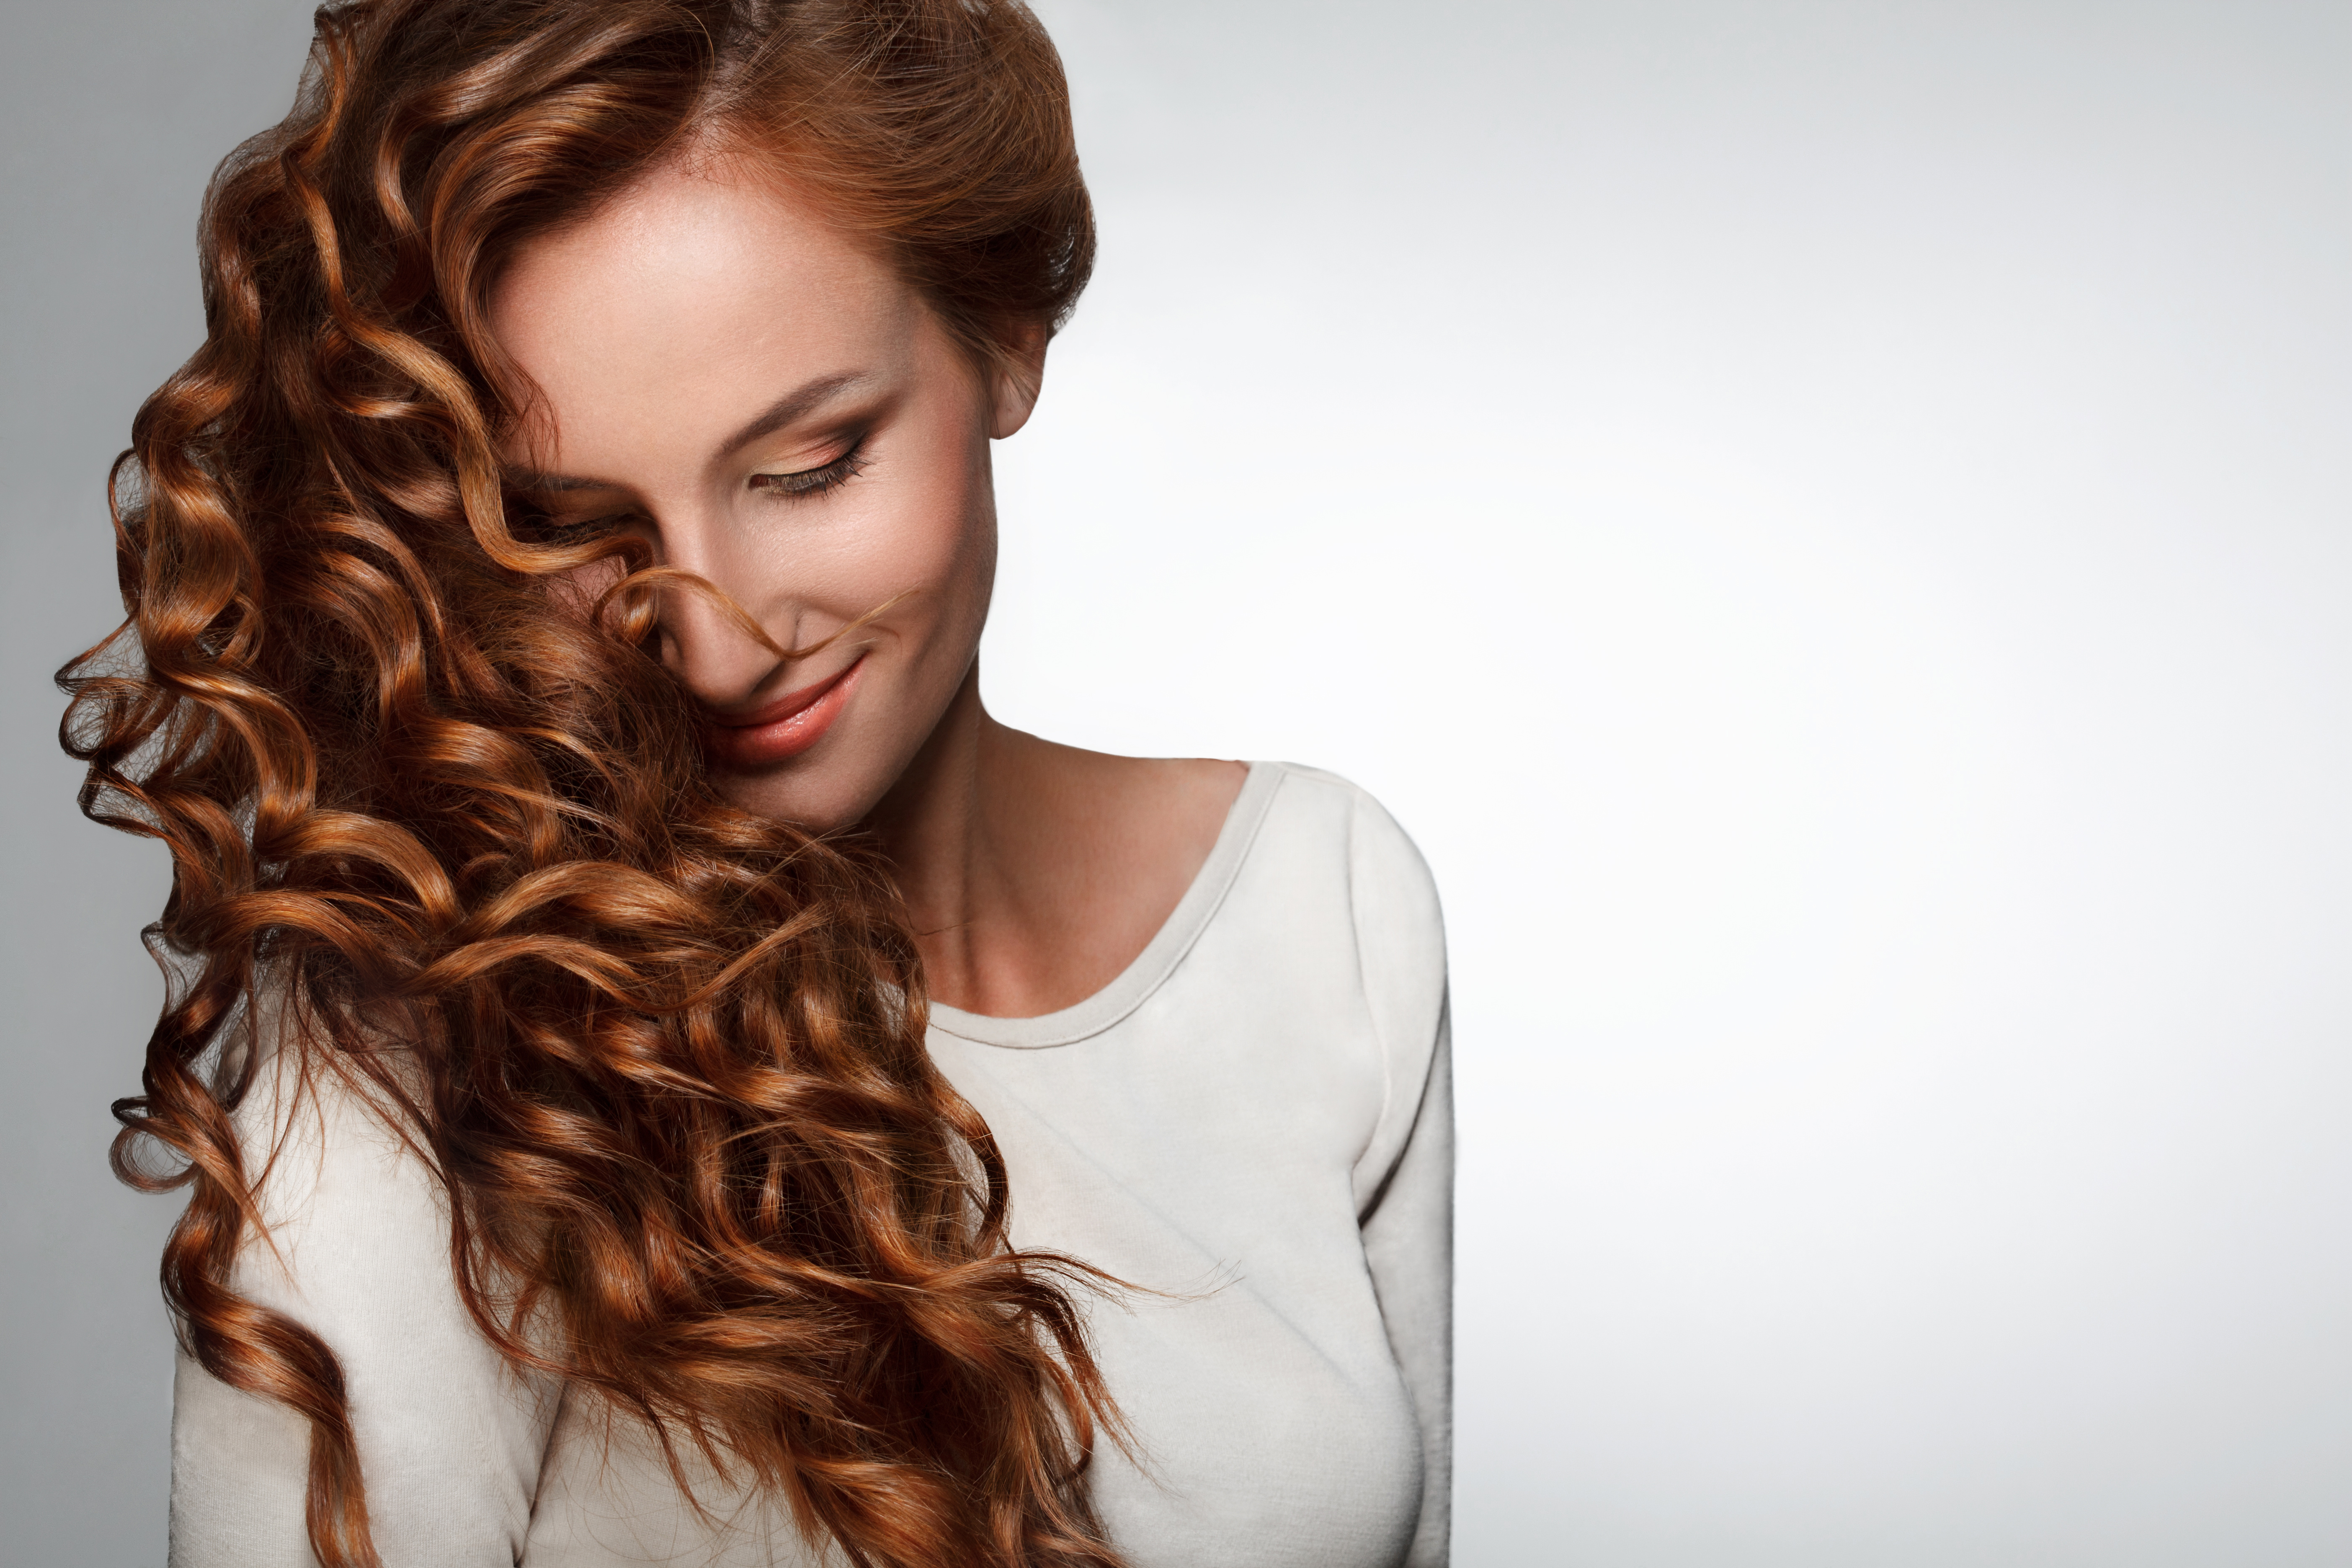 Red Hair. Woman with Beautiful Curly Hair photo